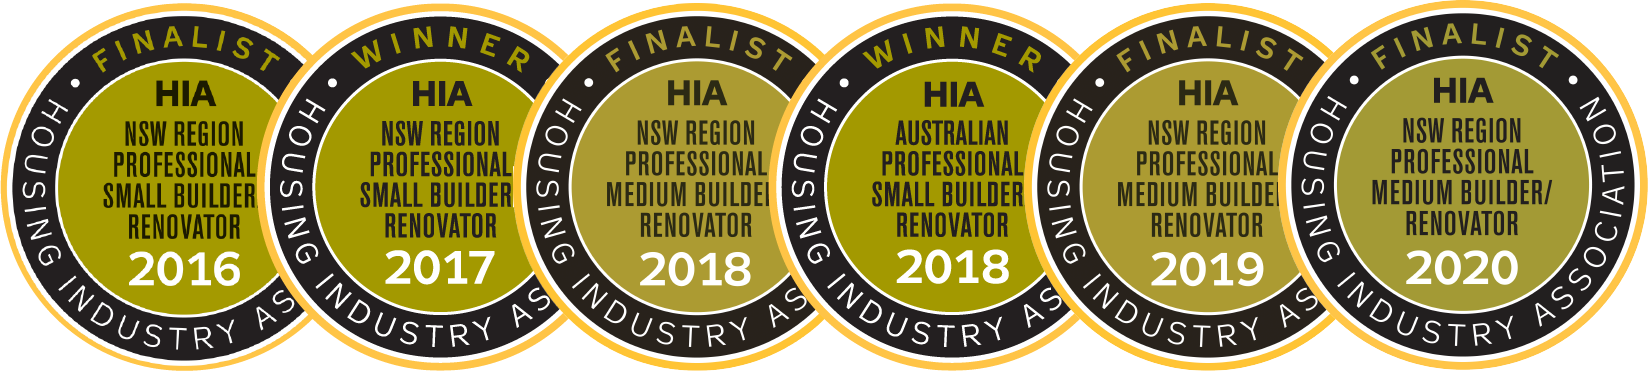 A range of HIA awards from 2016 to 2020